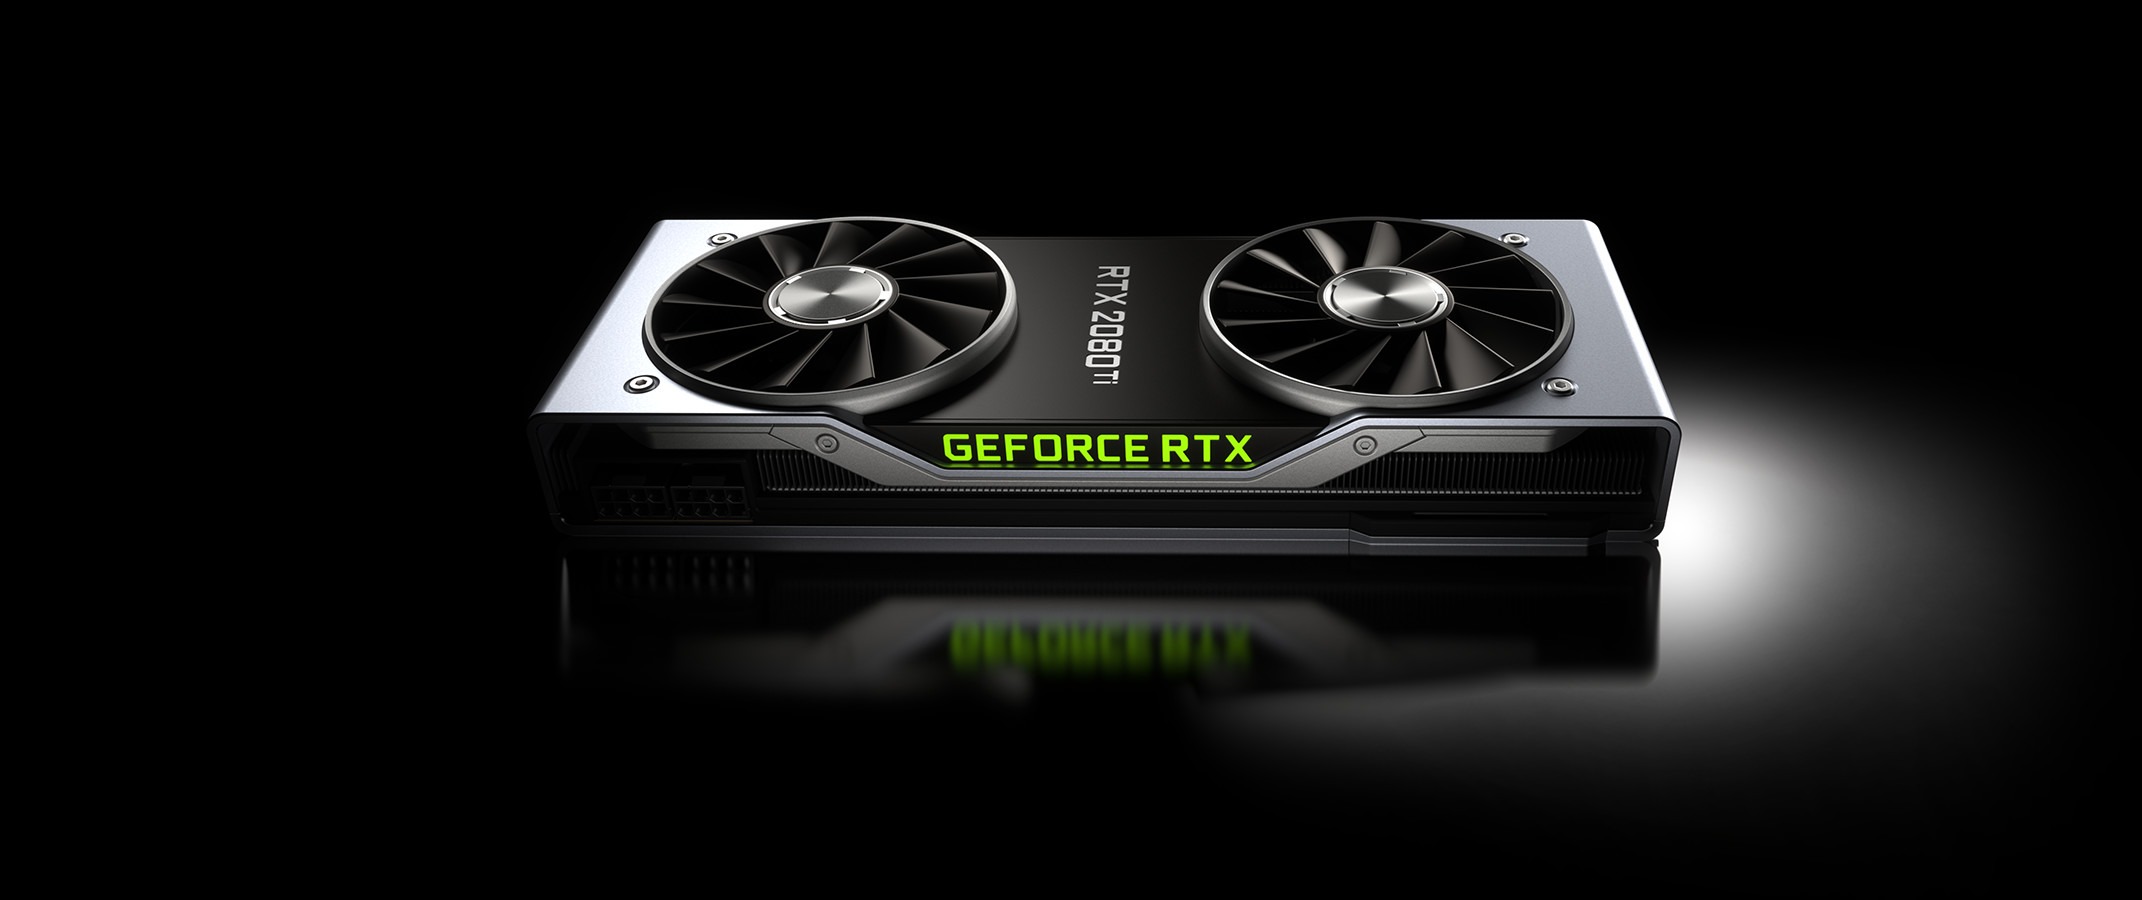 GeForce RTX 20 Series Graphics Cards and Laptops